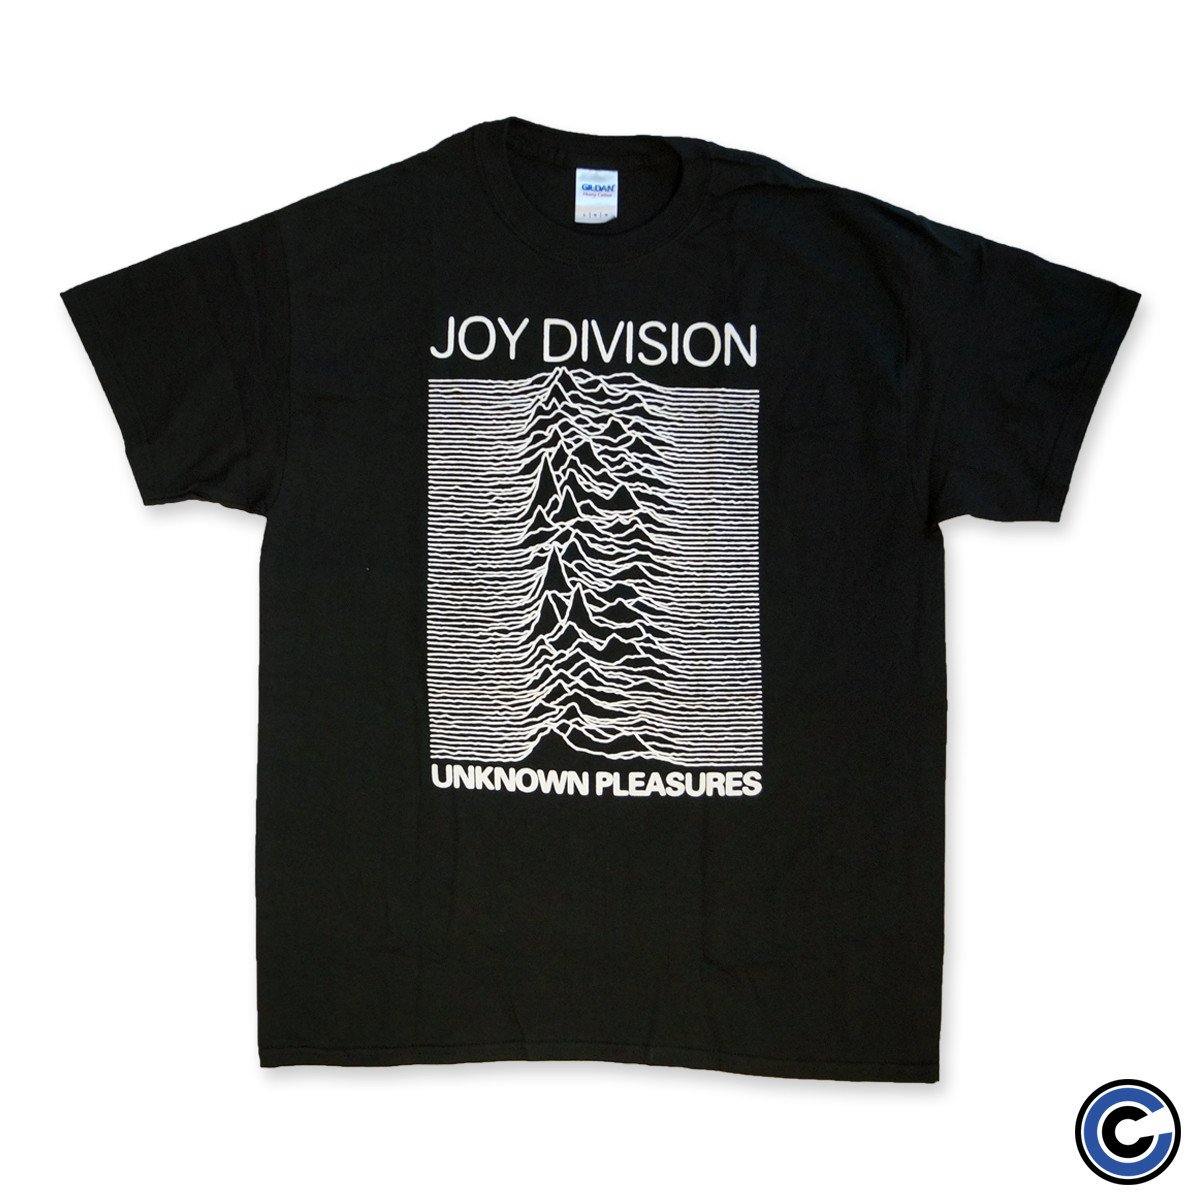 Buy – Joy Division "Unknown Pleasures" Shirt – Band & Music Merch – Cold Cuts Merch